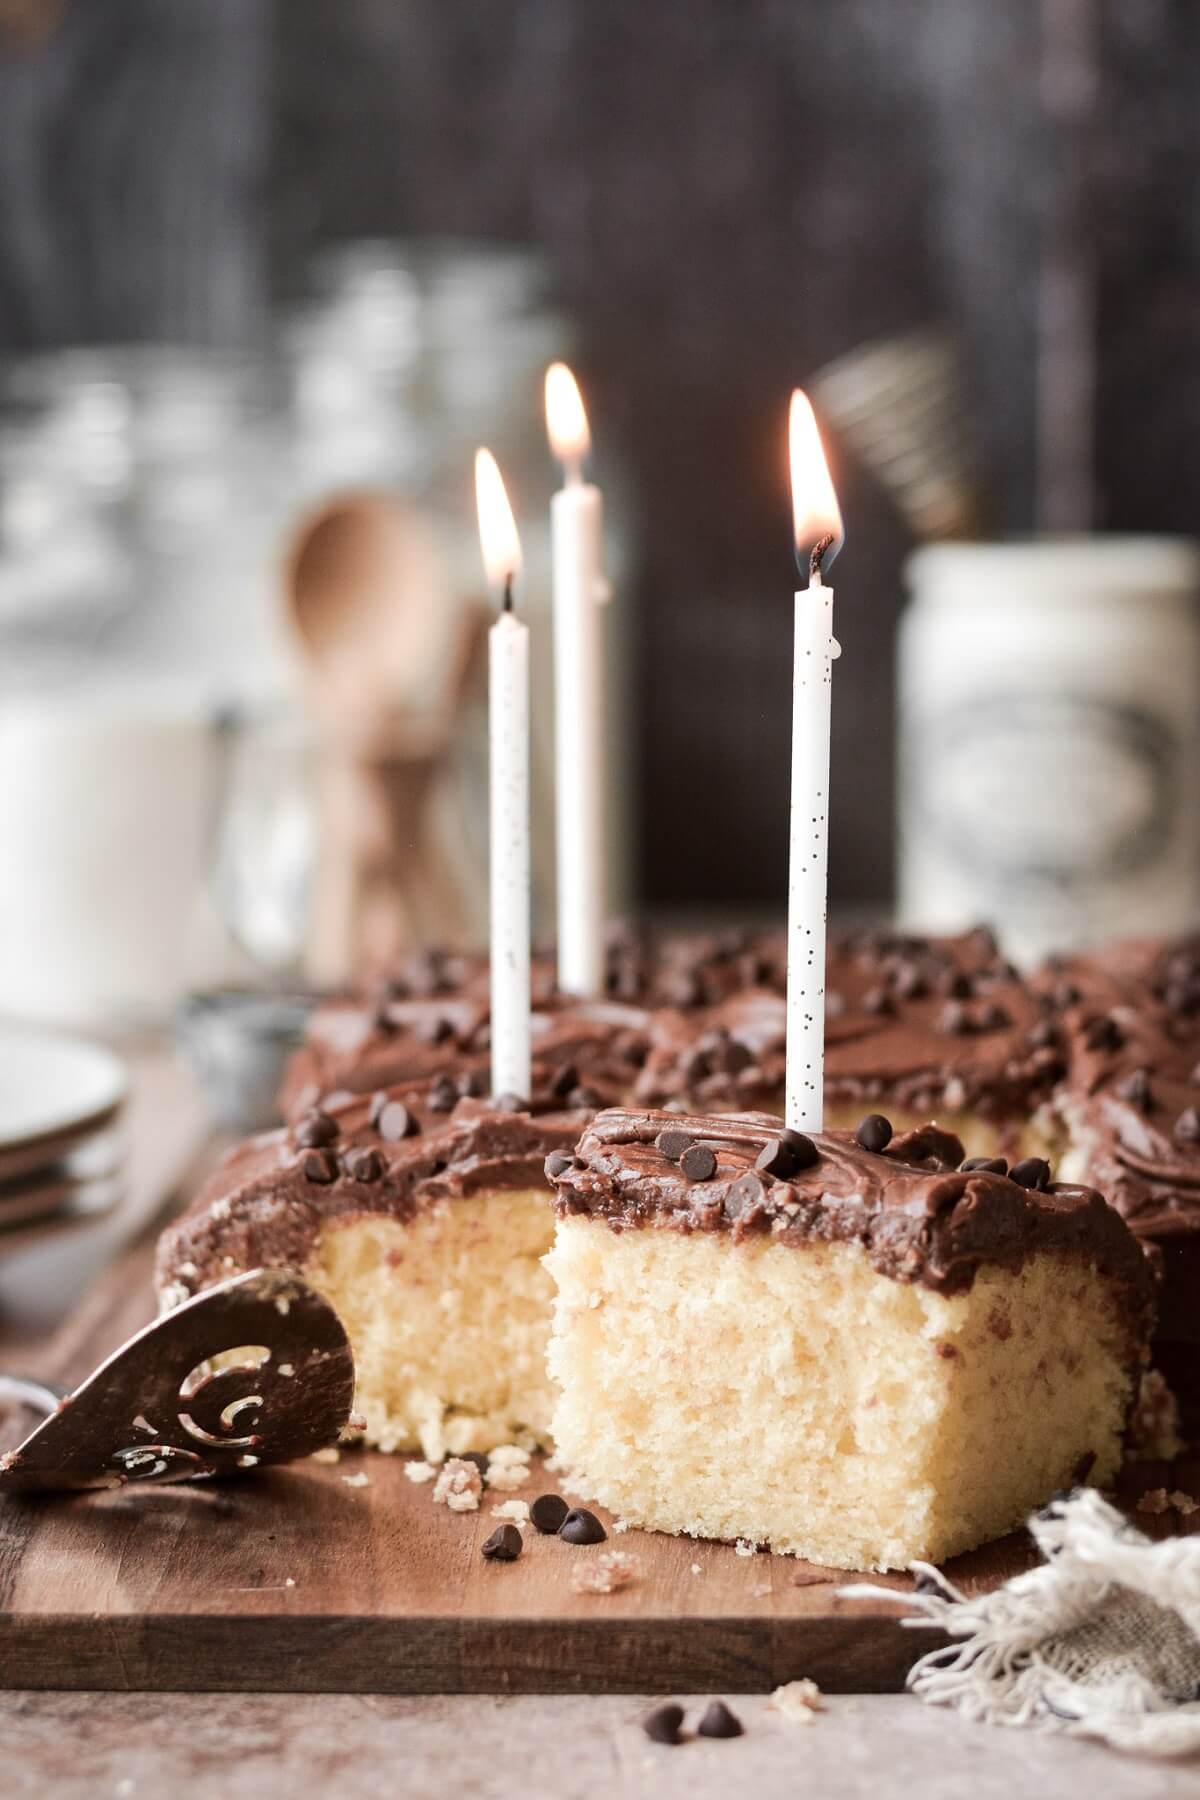 Pieces of yellow birthday cake with chocolate frosting, topped with birthday candles.